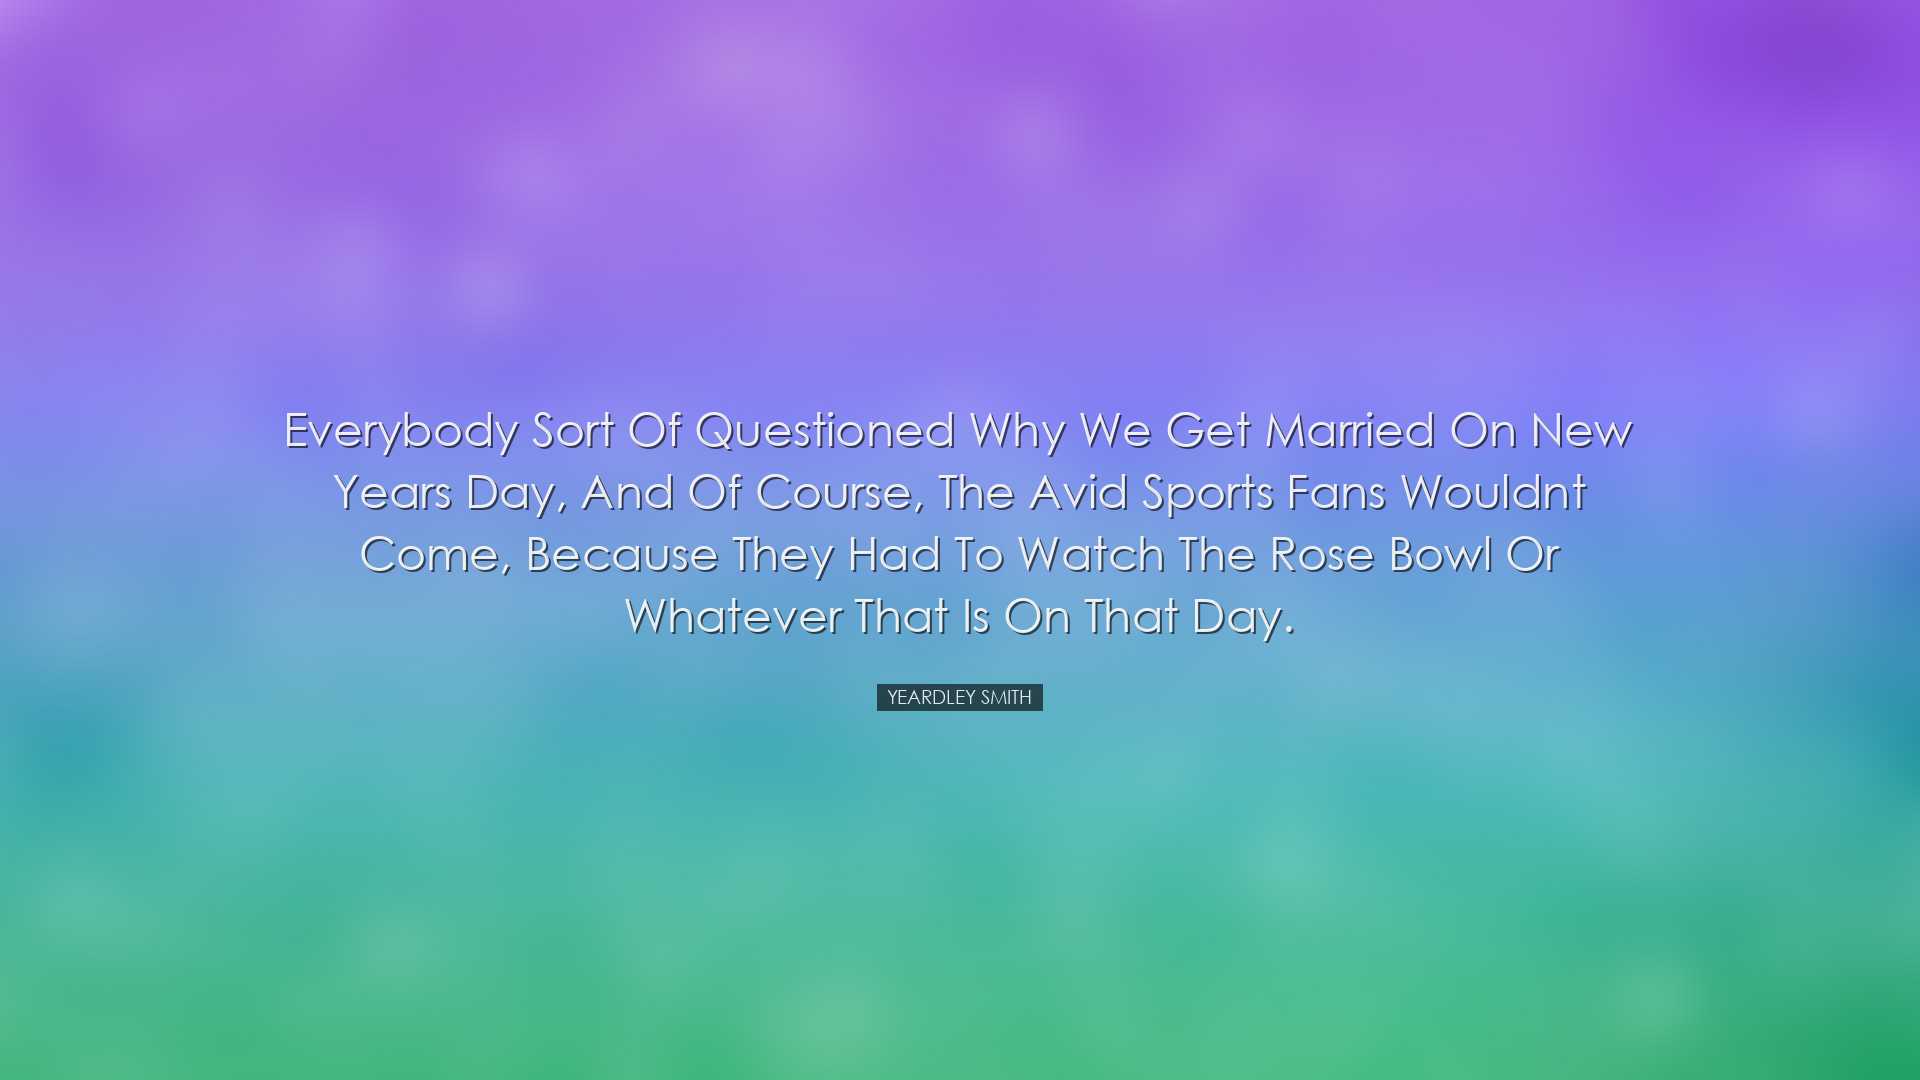 Everybody sort of questioned why we get married on New Years Day,